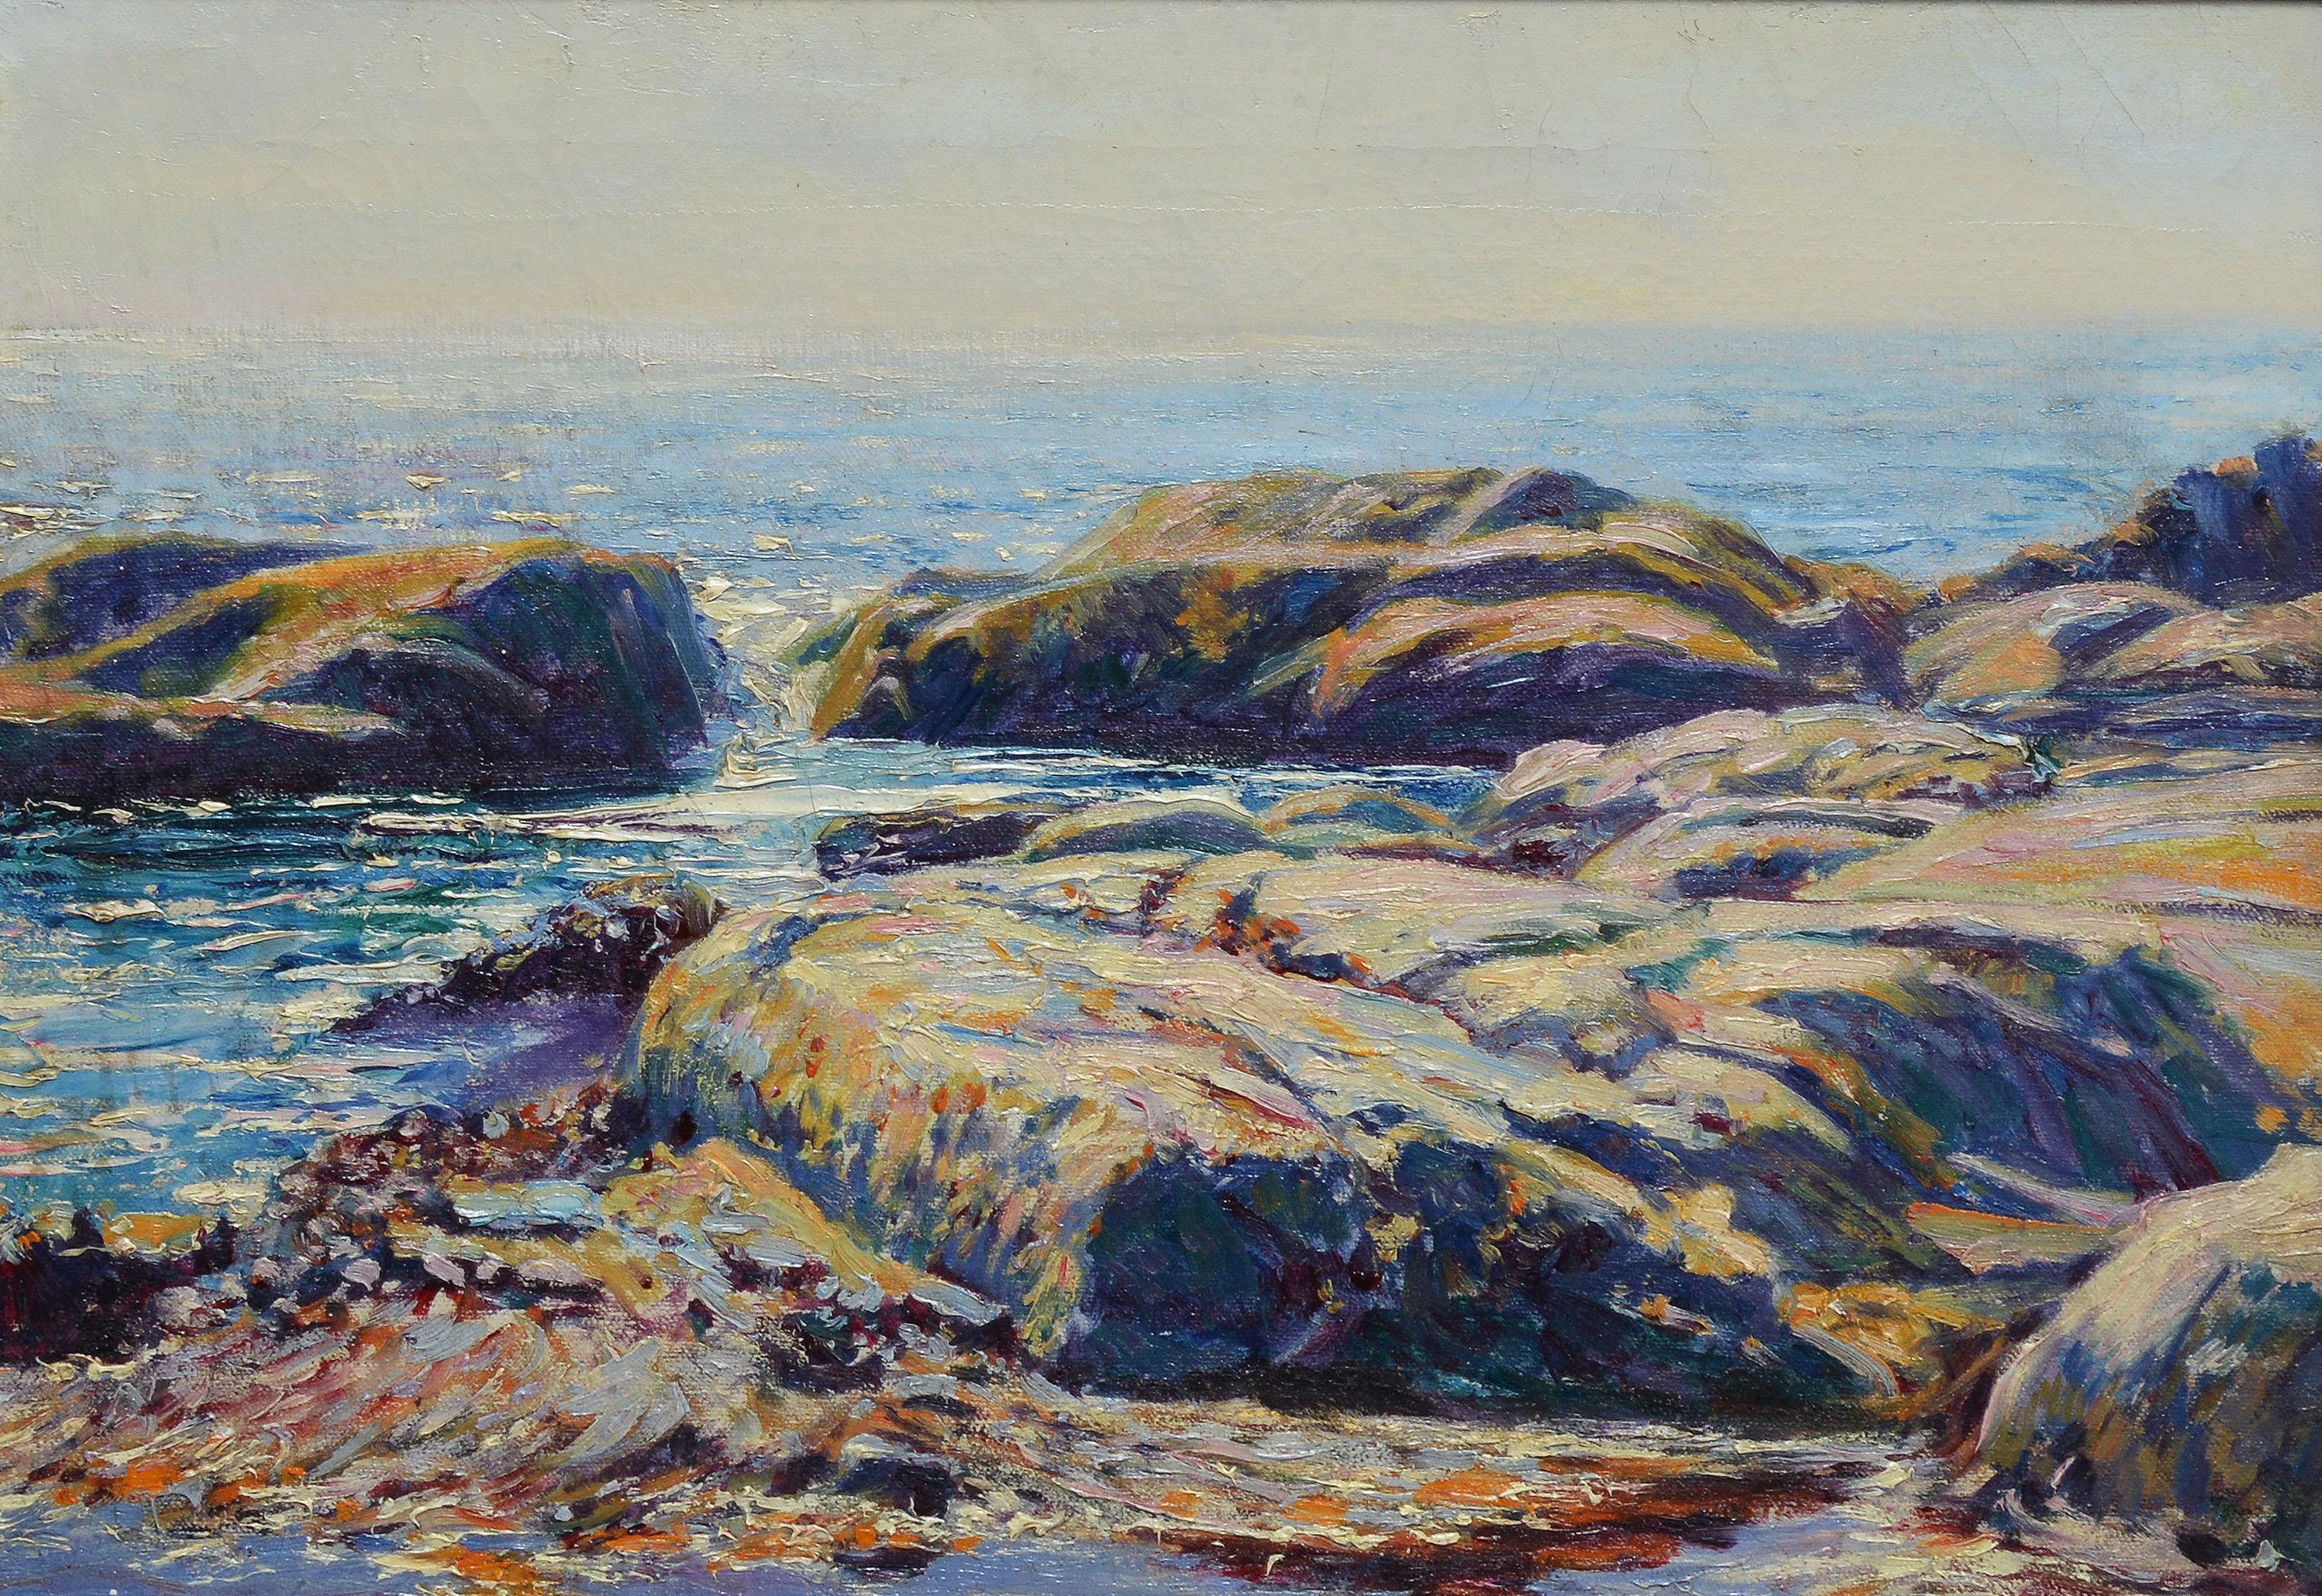 Antique Impressionist Oil Painting of A New England Coast by Joseph Hatfield - Gray Landscape Painting by Joseph Henry Hatfield